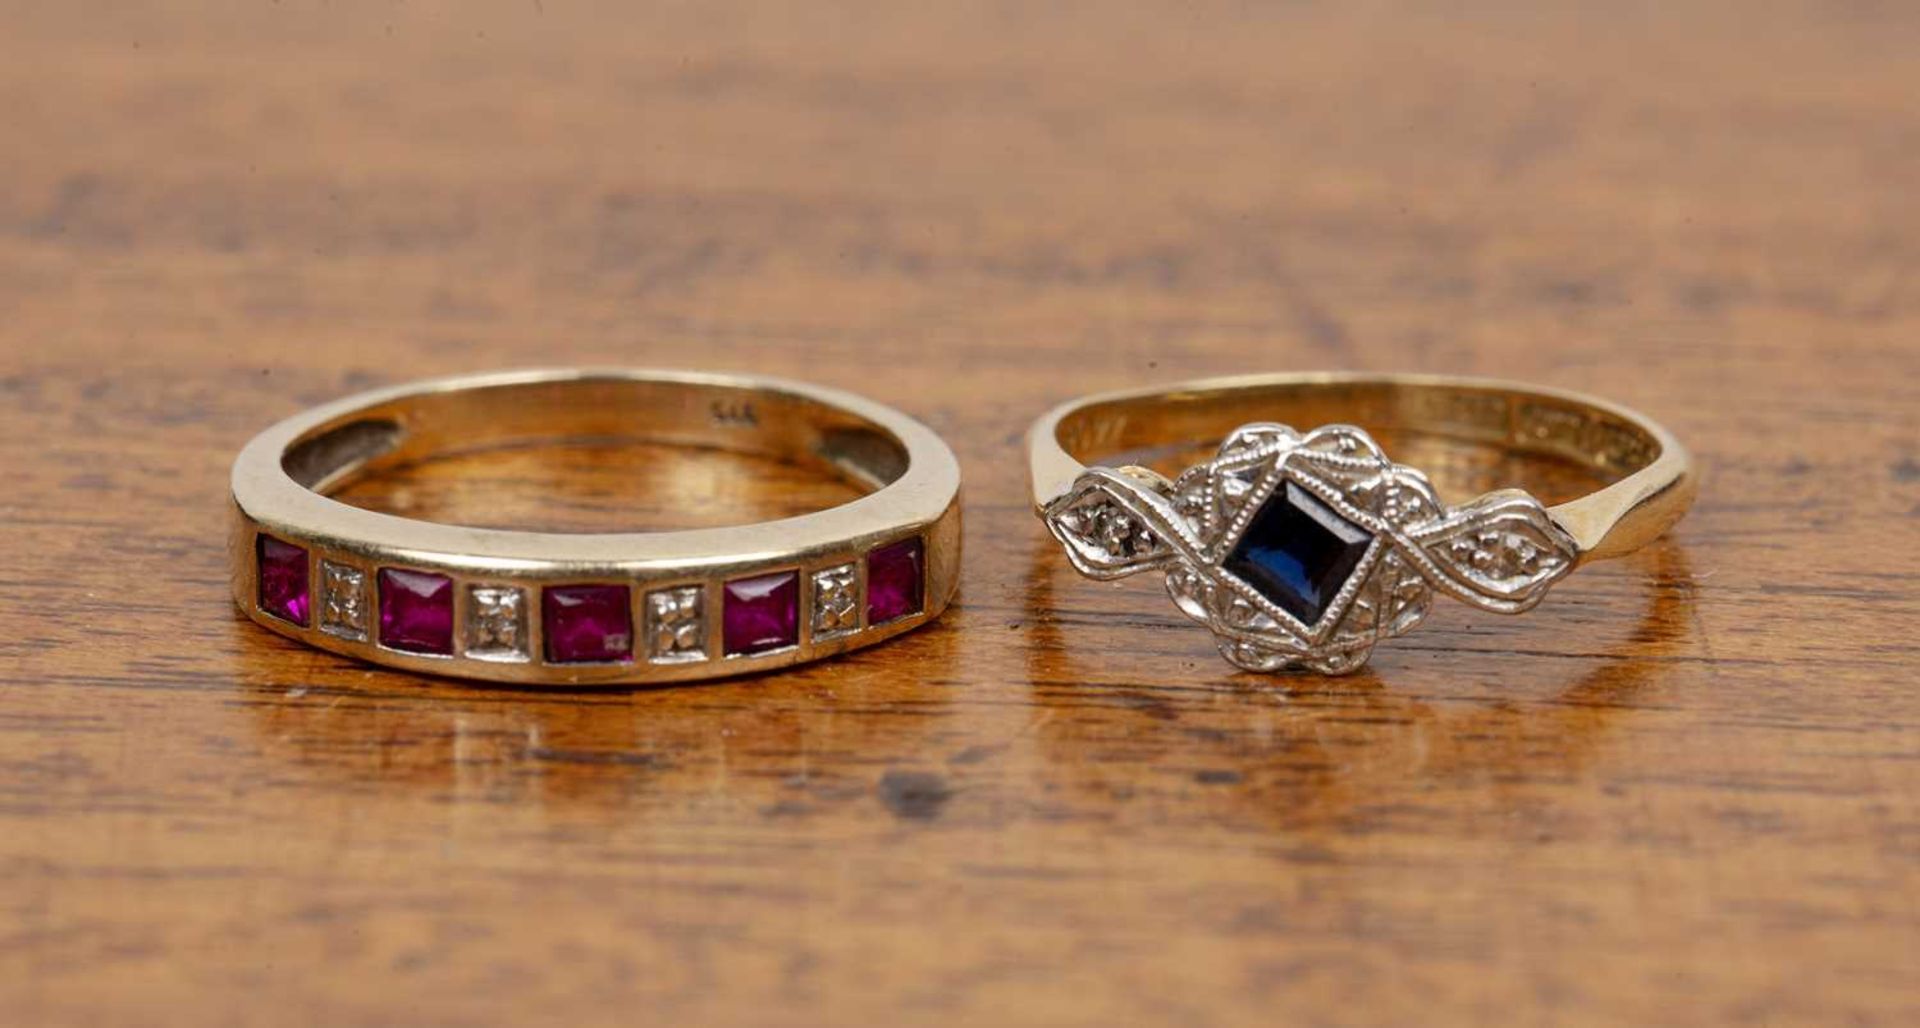 Two rings the first an 18ct yellow gold and platinum example, with diamond chips and a blue